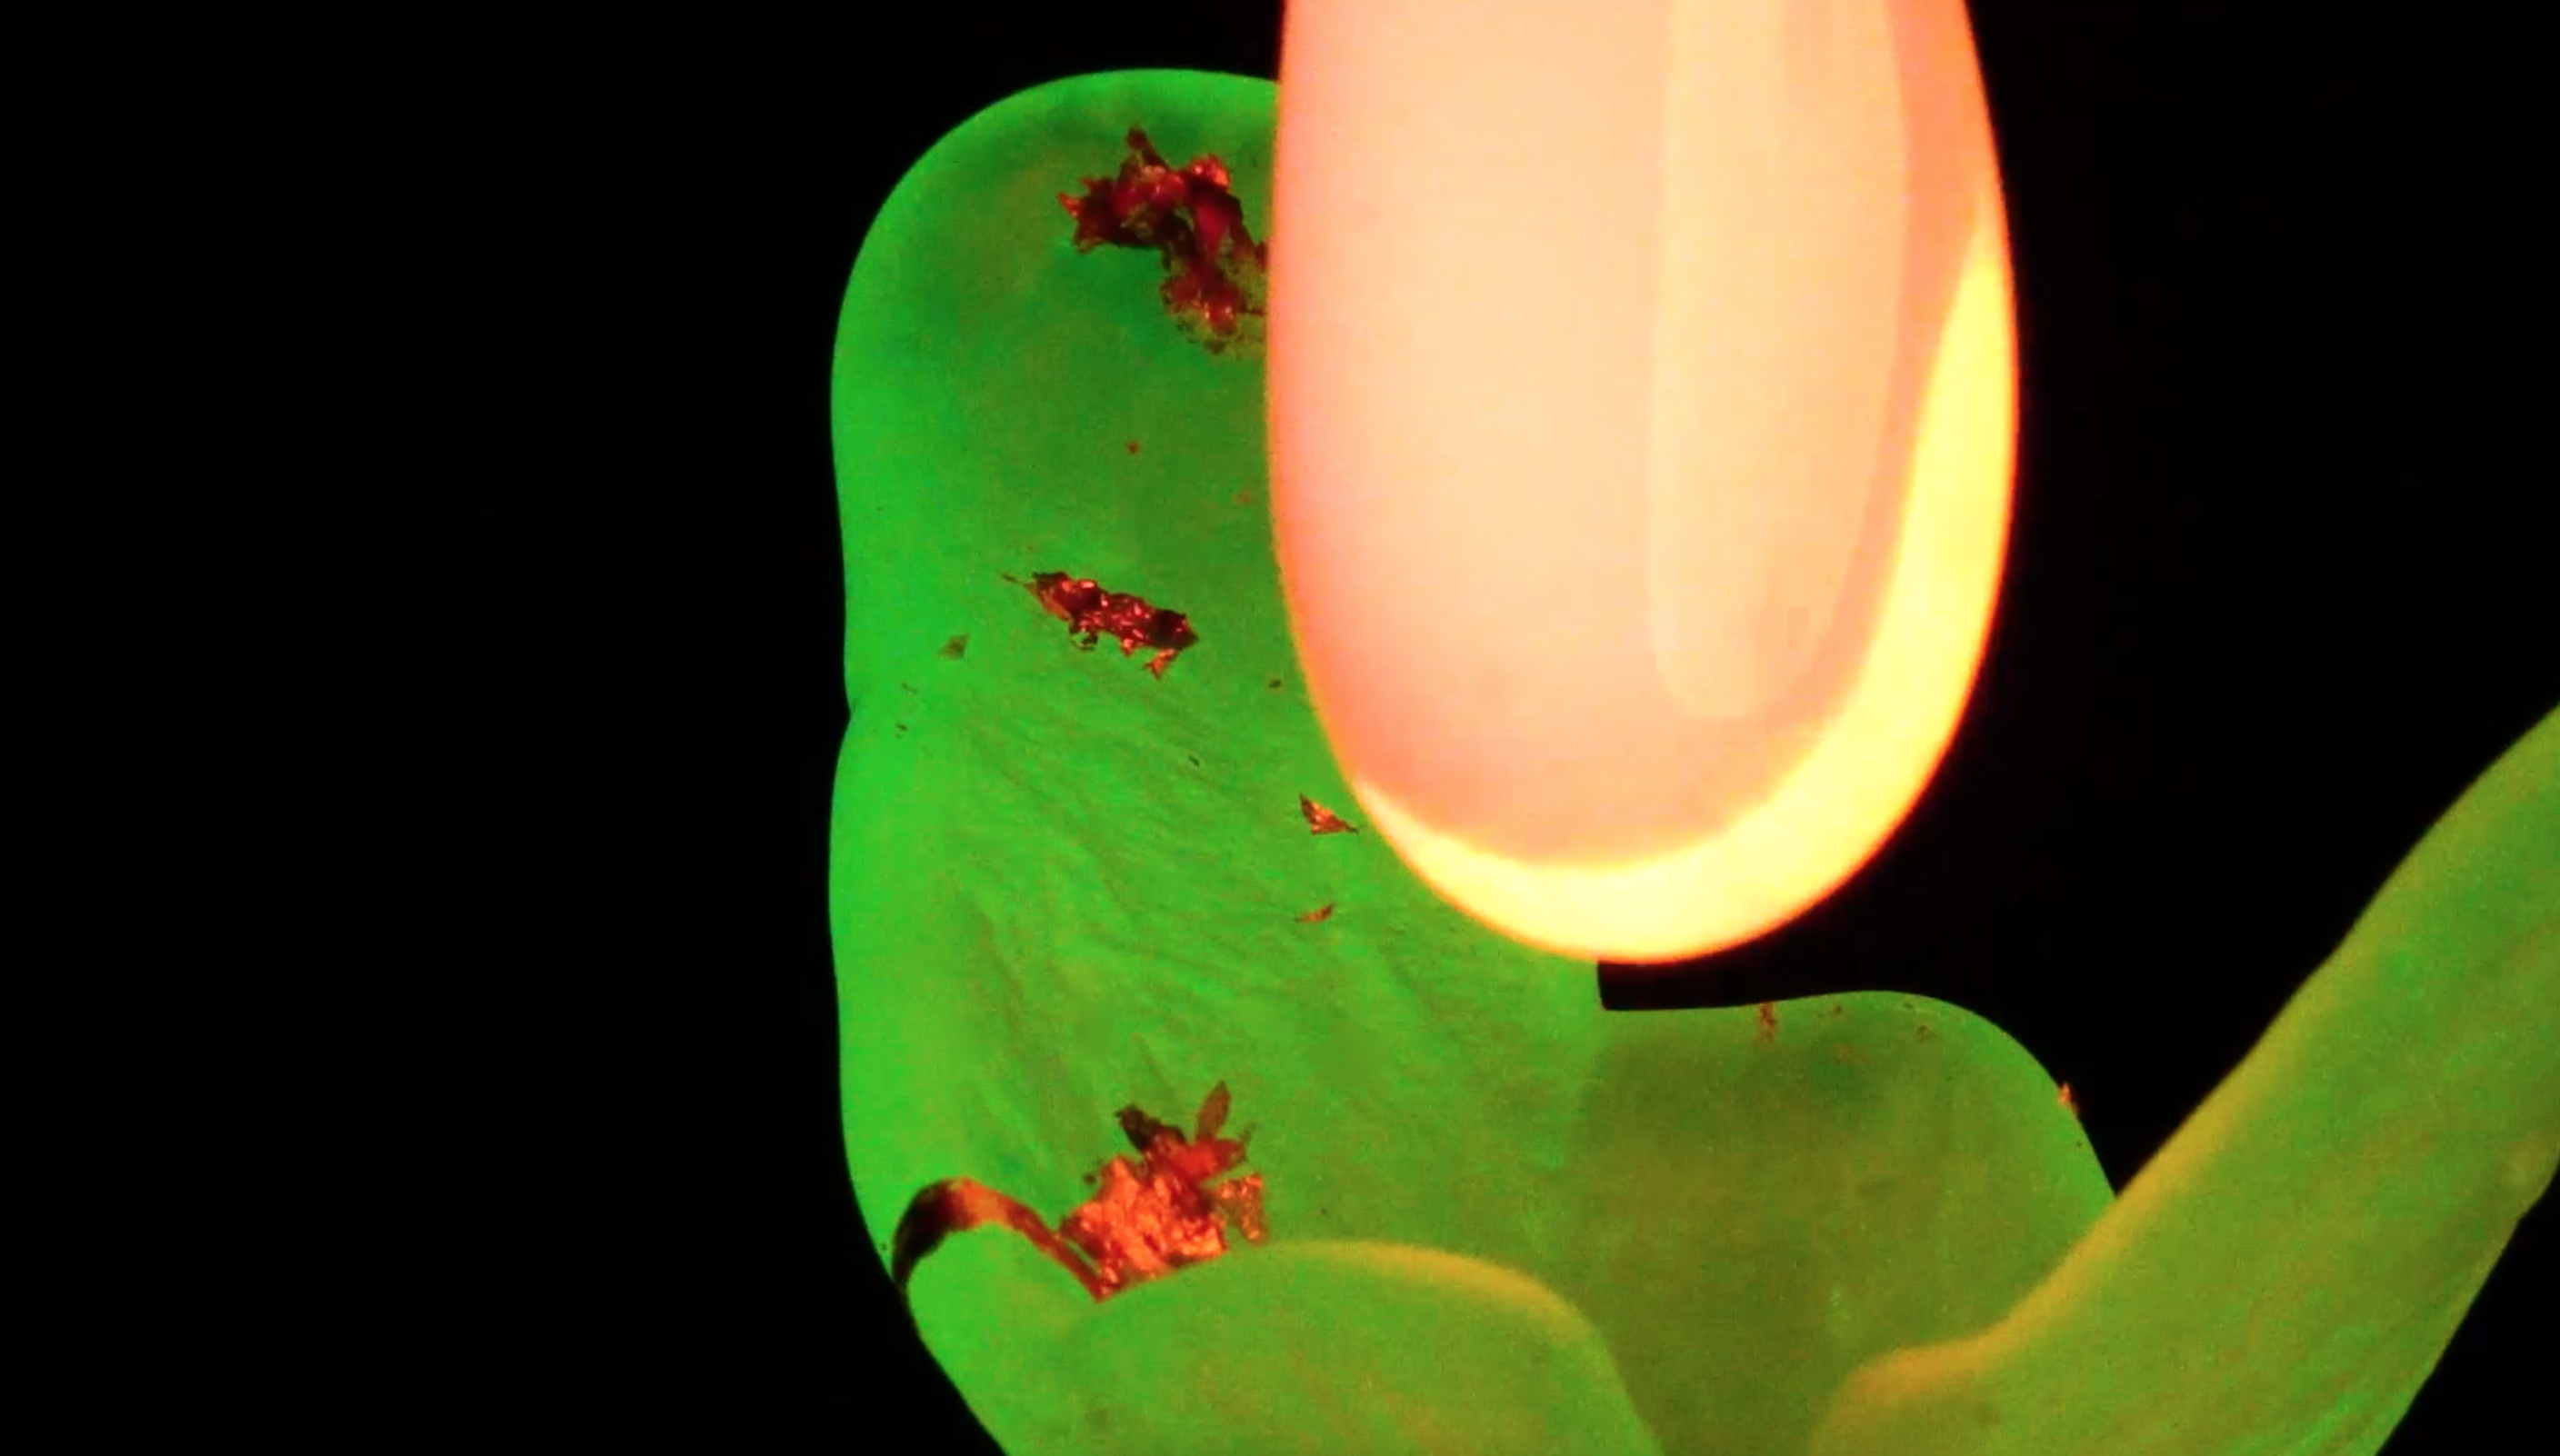 This piece of work portrays my experience of living through the pandemic as a foreigner in the US. The video consists of two scenes; The first scene is a view through the bottom of the glass tank. Catching the moment of molten glass dropped into the water and broke within several macro-explosions. The second part of the scene is an uranium glass object with gold leaf scattered on the top. Then two amorphous blobs of hot glass come into the frame. They dance around the object seductively. The audio is composed of a mixture of electronic sounds, news broadcasts regarding Covid, and cicada sounds from rural Taiwan.